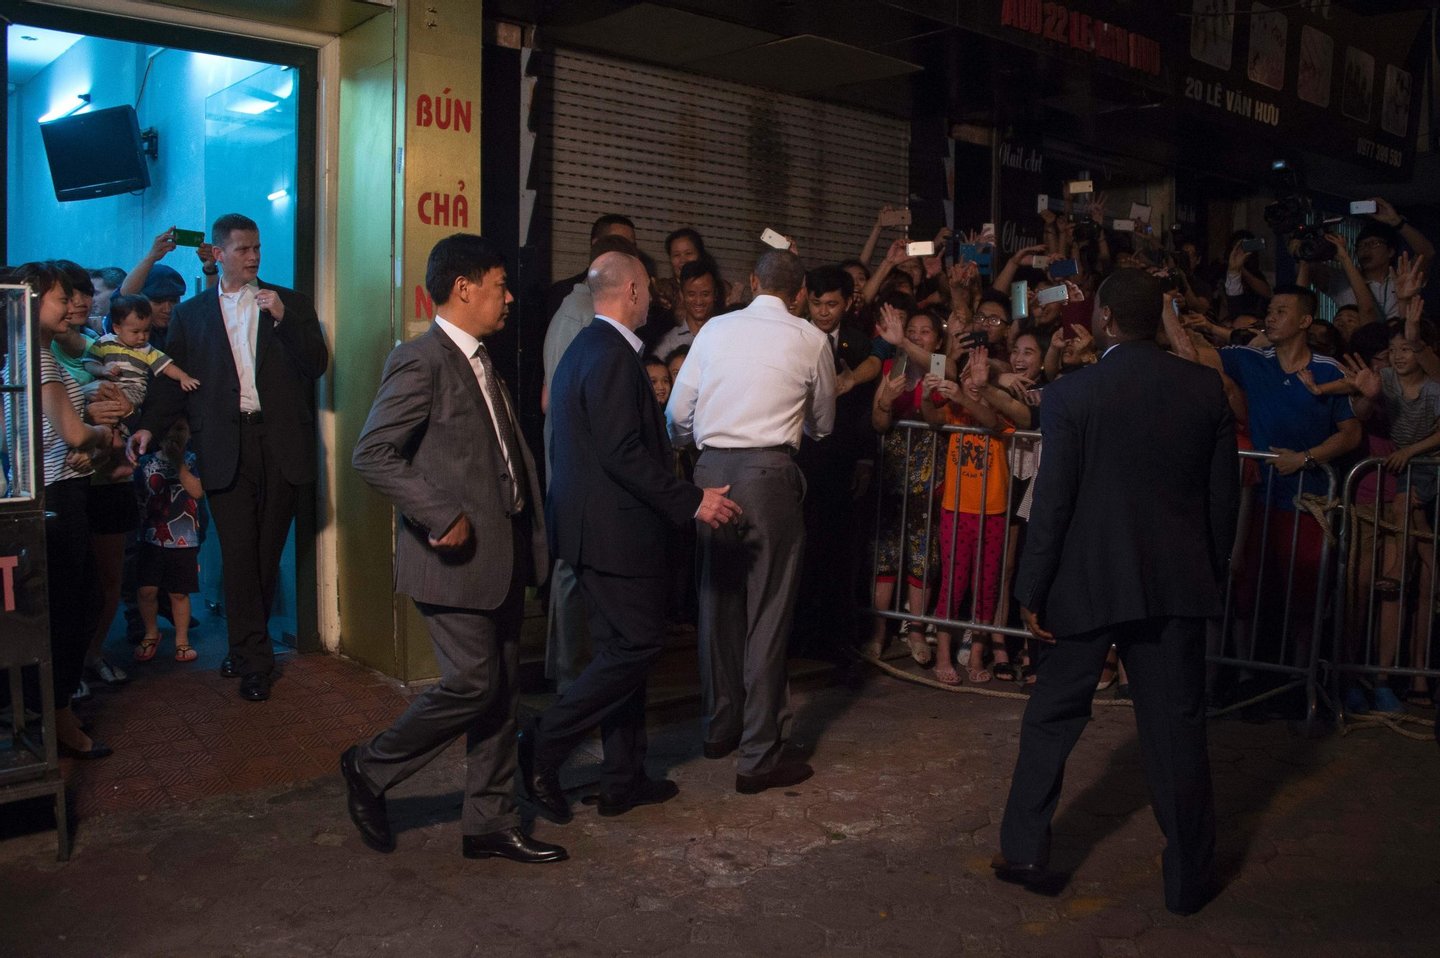 US President Barack Obama (C) shakes hands with locals after eating dinner at Bun cha Huong Lien with CNN's Anthony Bourdain in Hanoi late on May 23, 2016. Obama praised "strengthening ties" between the United States and Vietnam at the start of a landmark visit on May 23, as the former wartime foes deepen trade links and share concerns over Chinese actions in disputed seas. / AFP / JIM WATSON (Photo credit should read JIM WATSON/AFP/Getty Images)